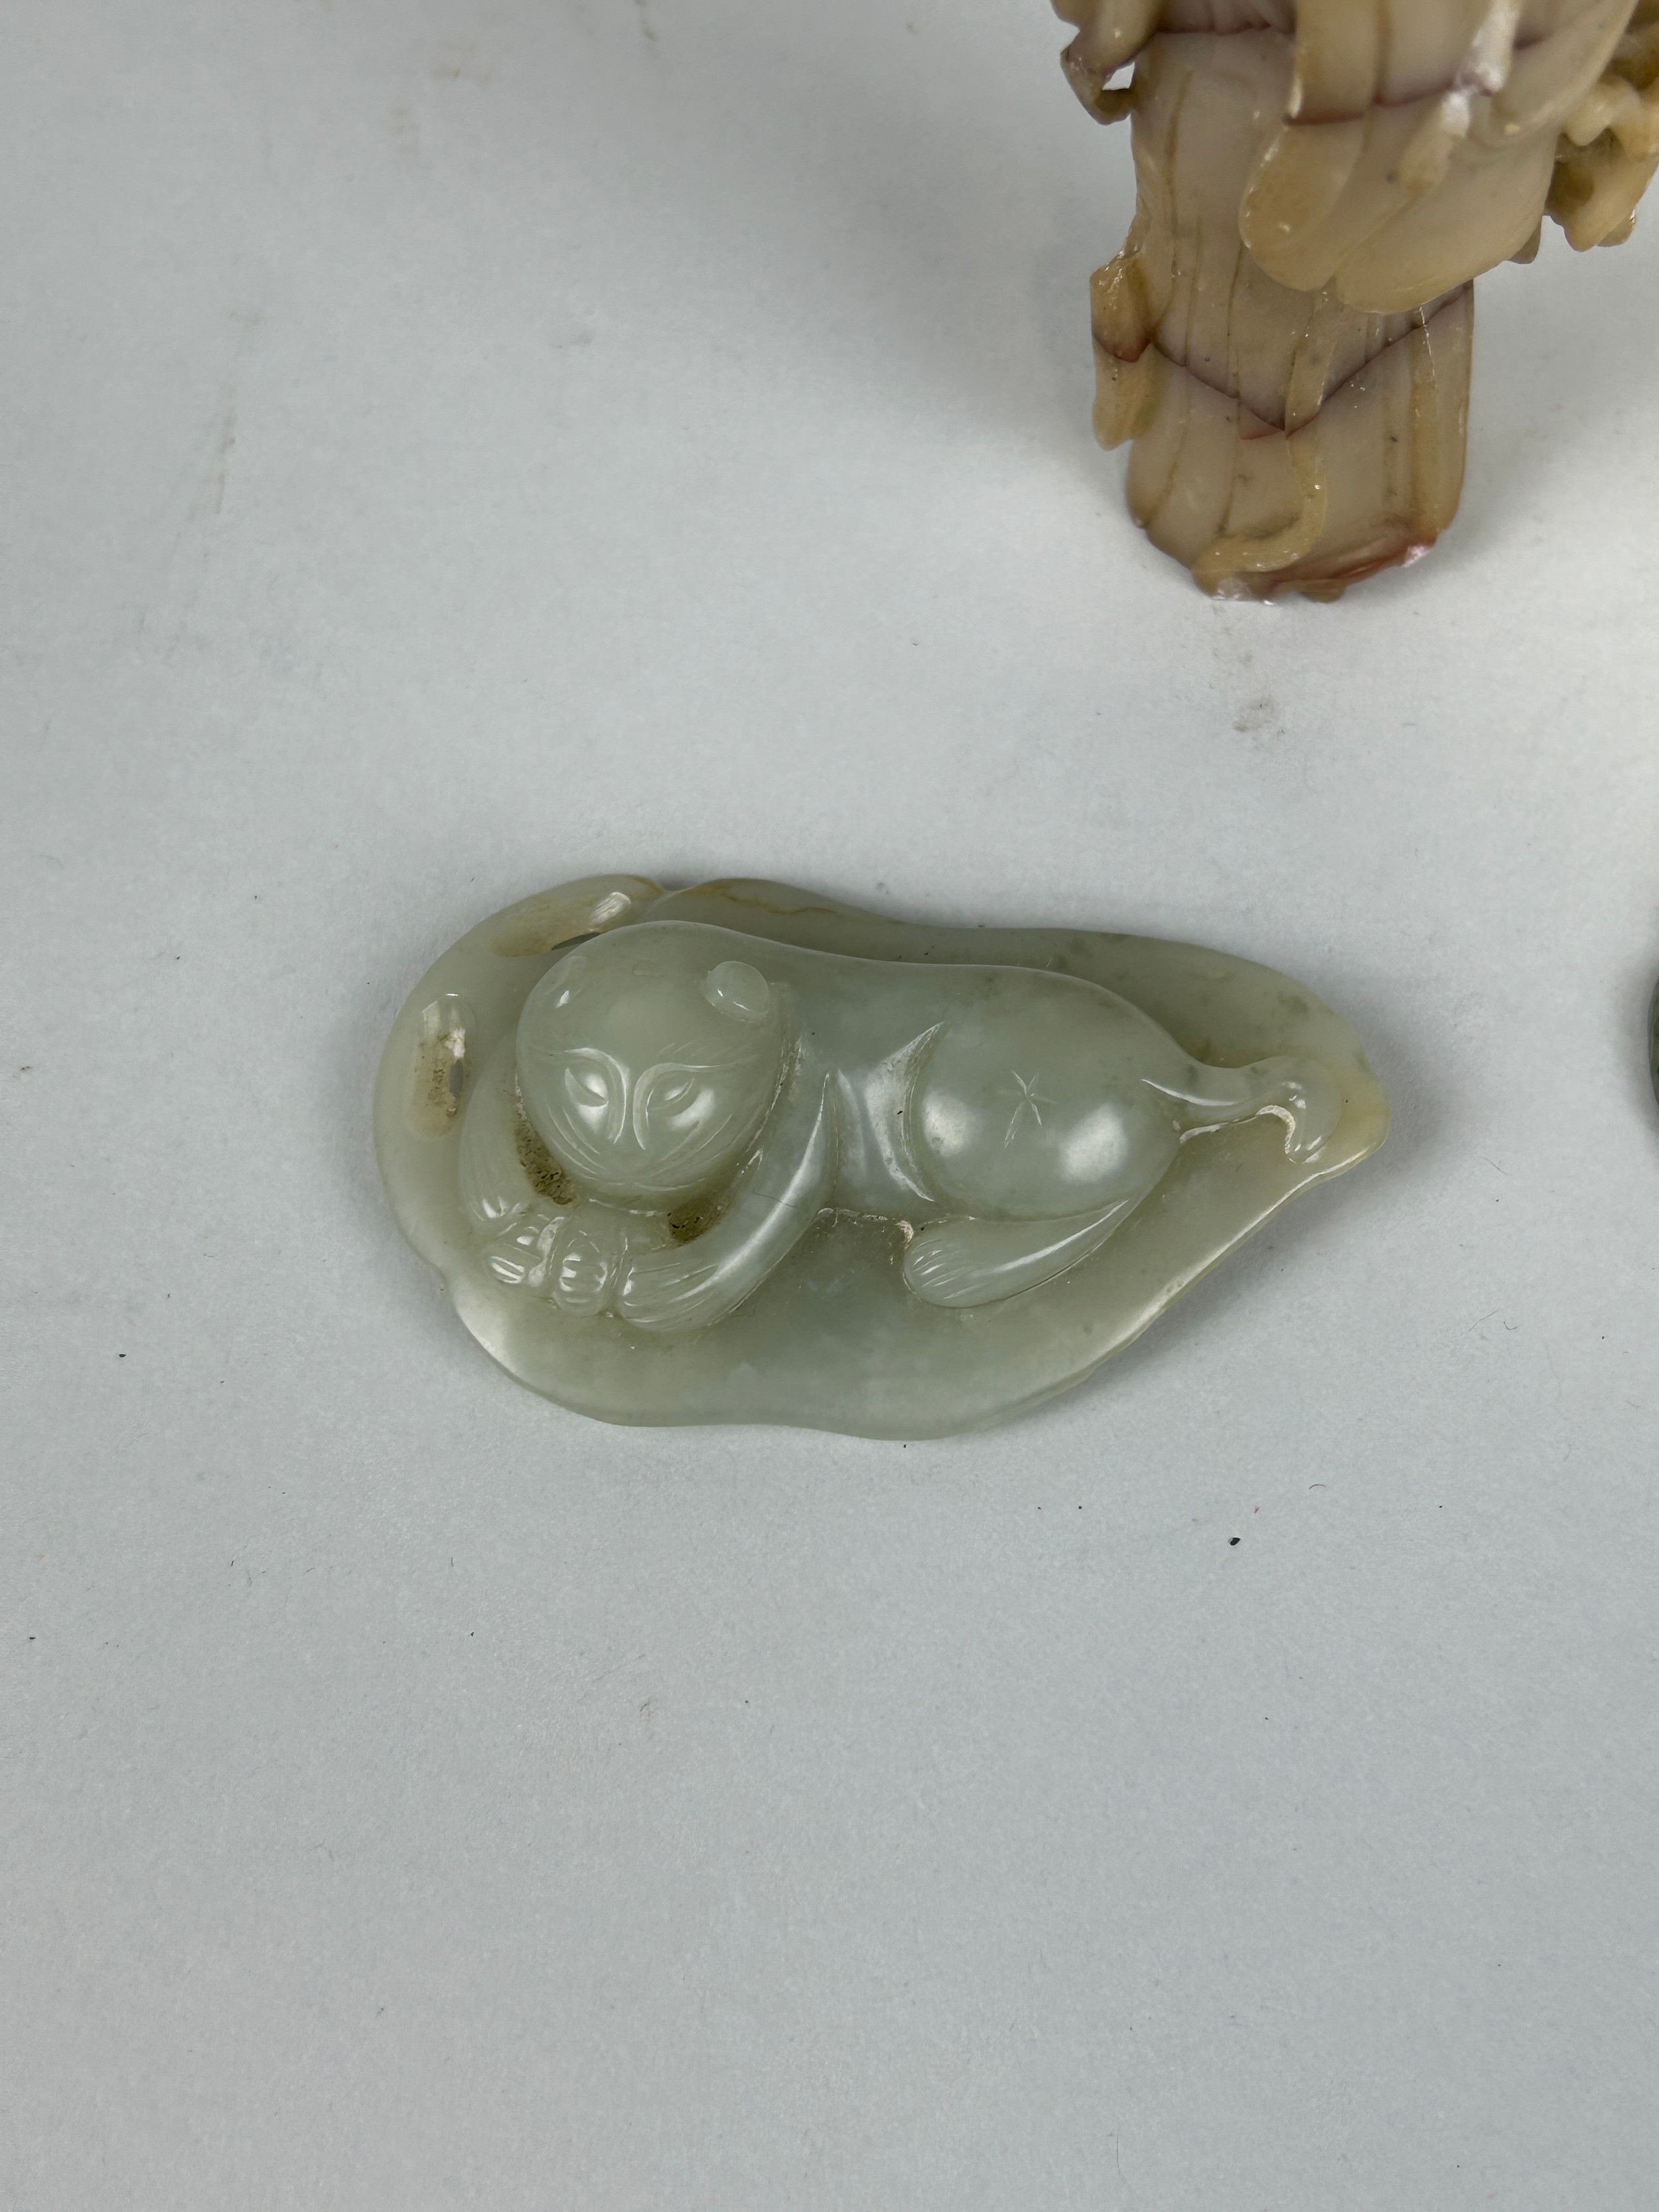 THREE CHINESE JADES TO INCLUDE A CAT PENDANT AND FIGURE OF GUANYIN (3), Guanyin 12cm H - Image 3 of 3